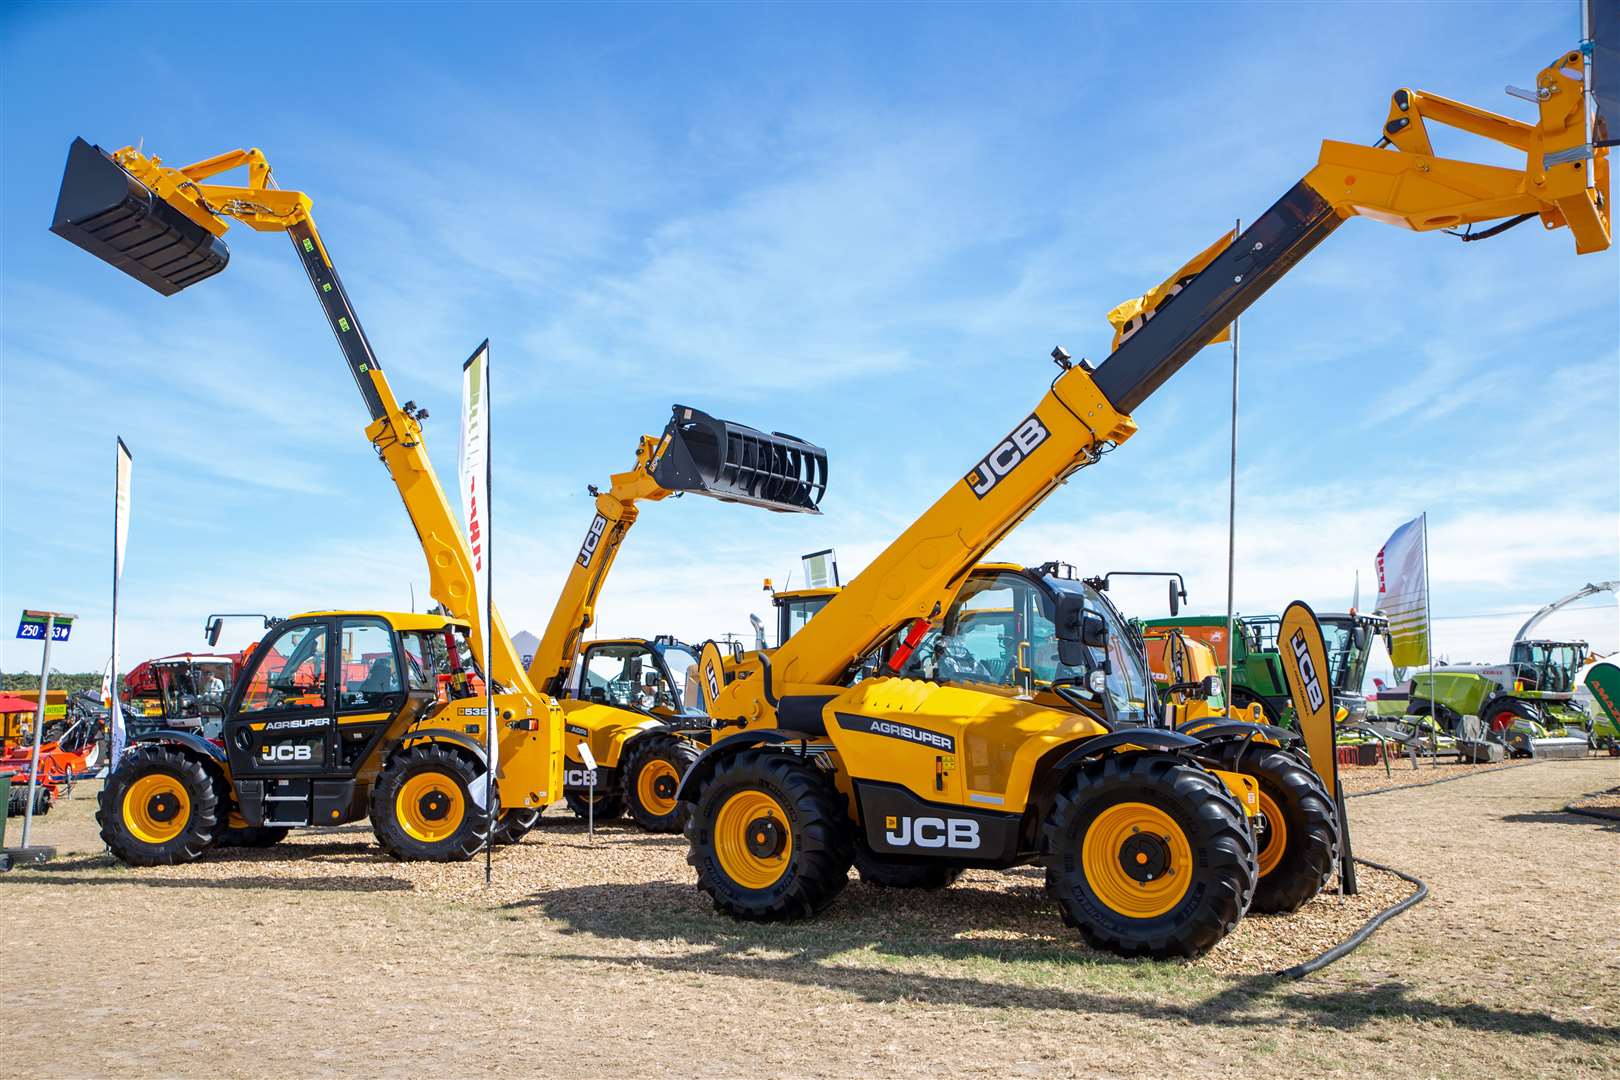 A JCB telehandler is still missing. Picture is a stock image.